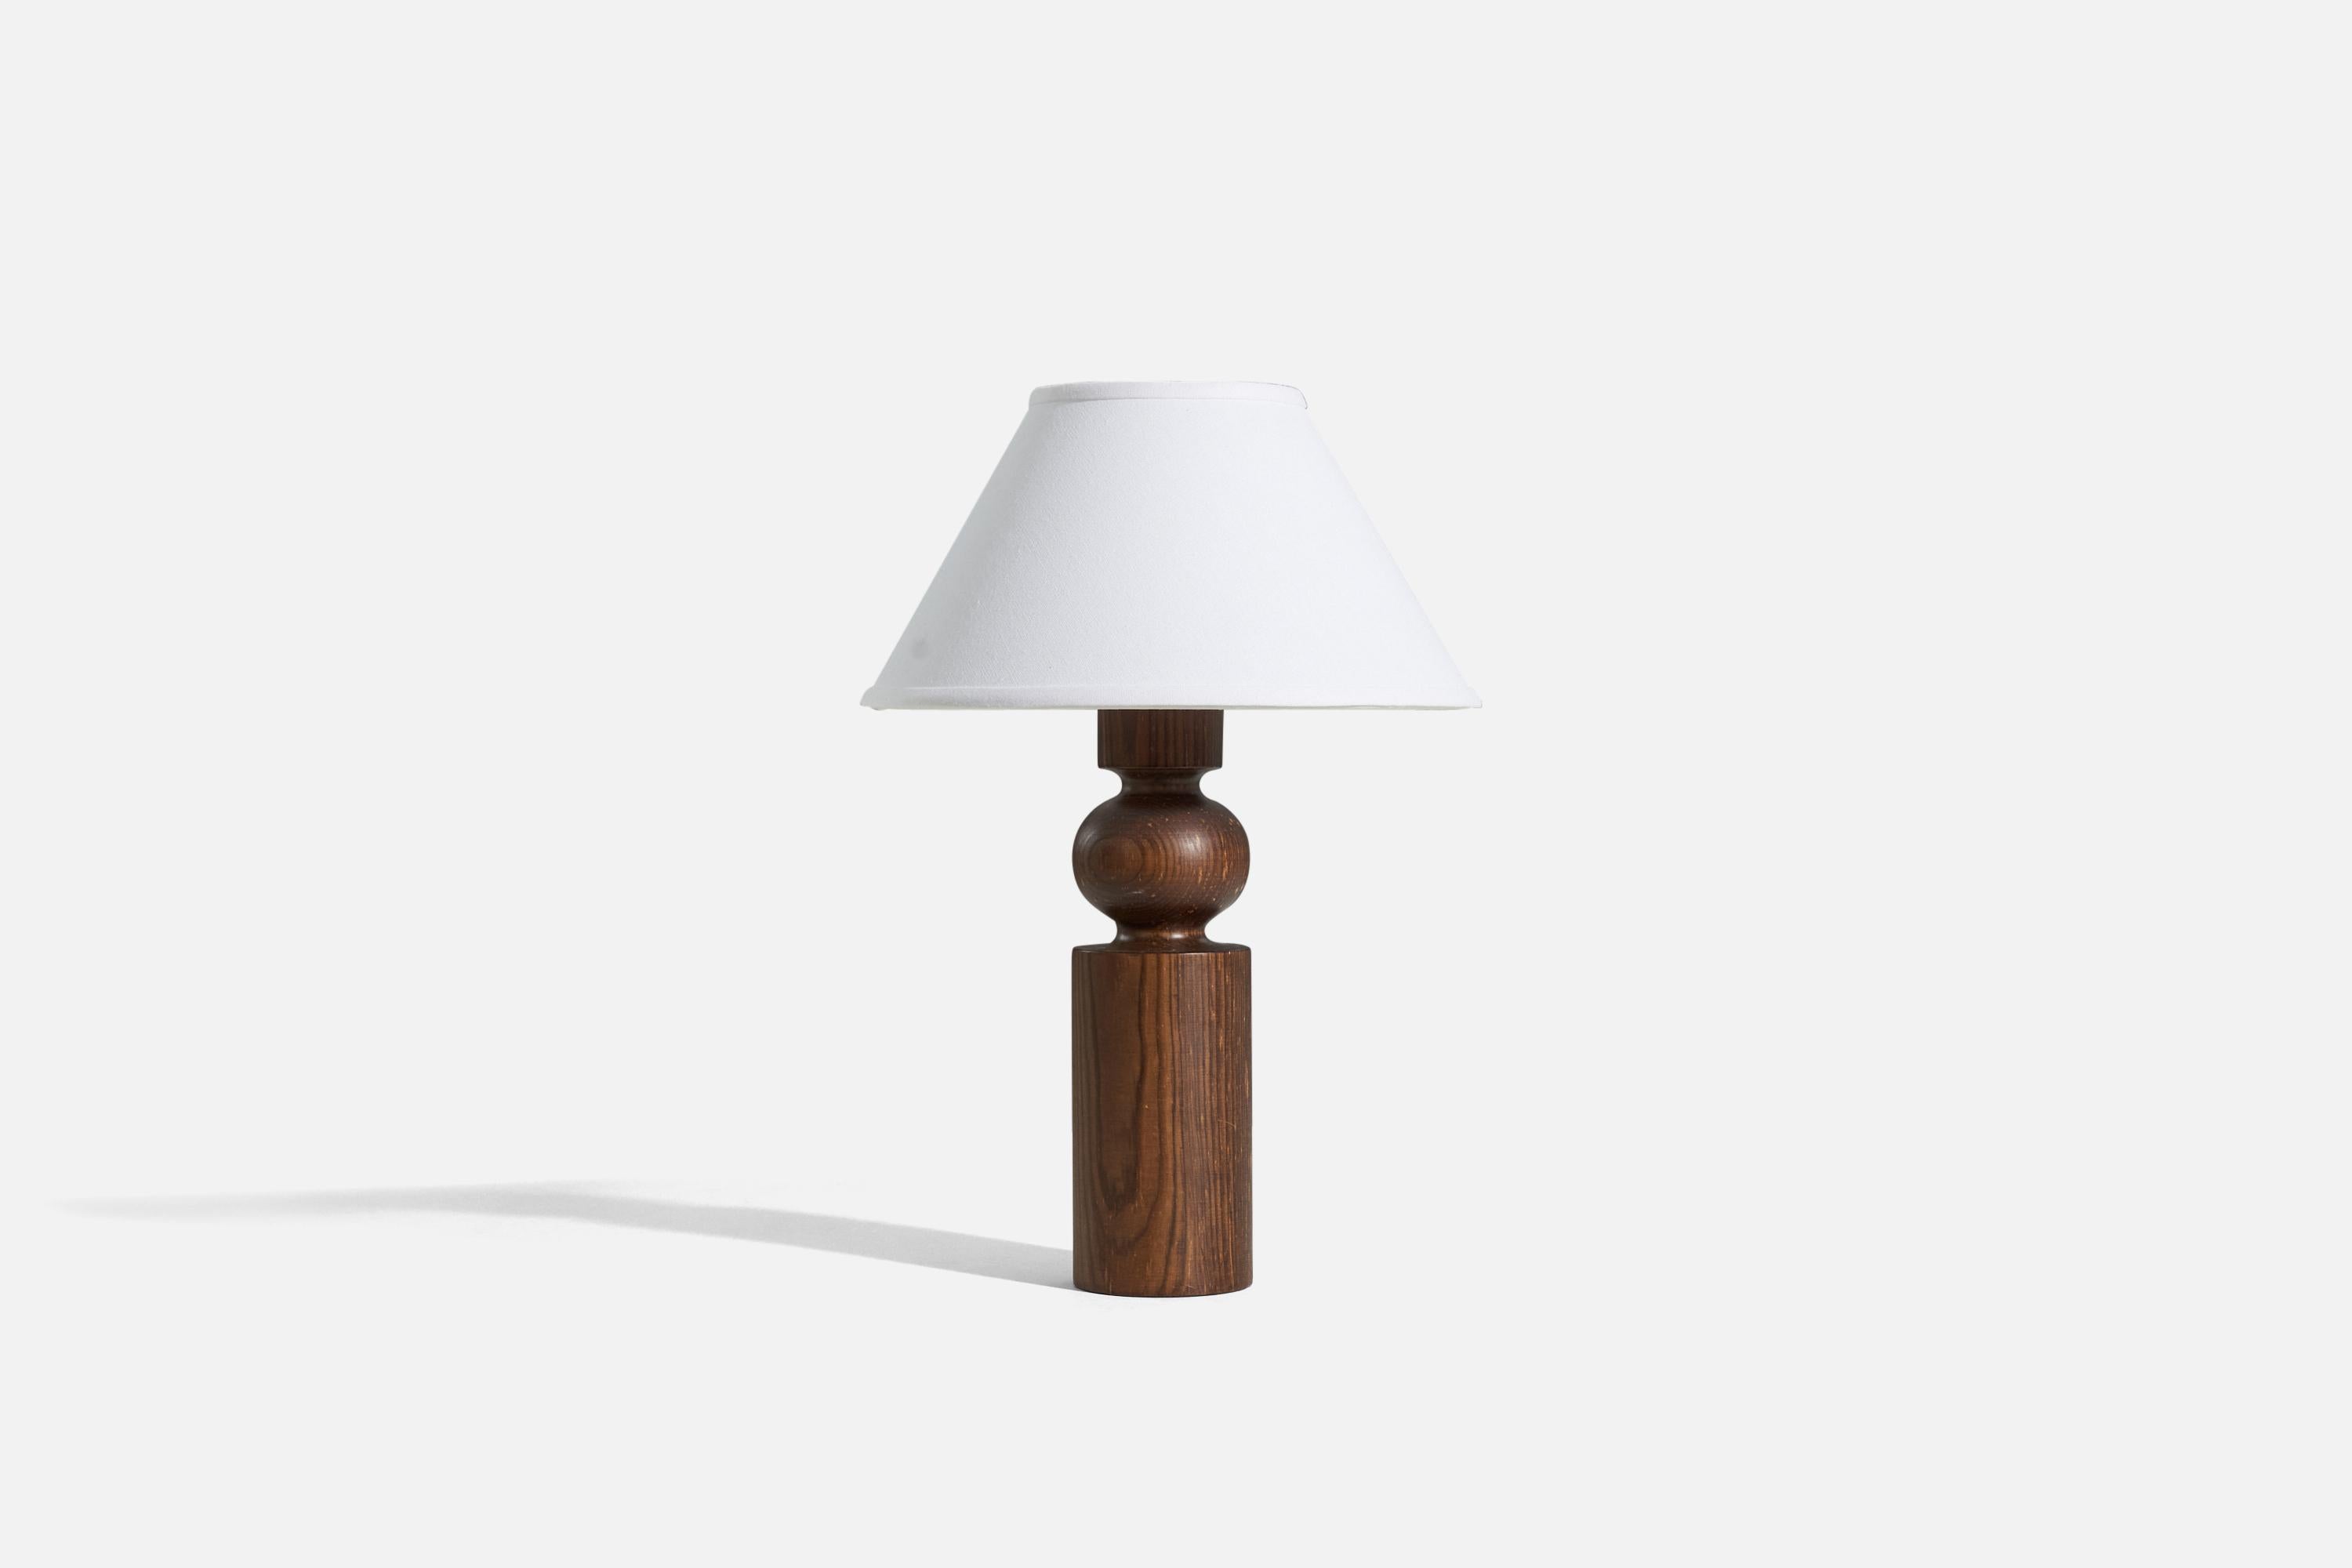 A solid pine table lamp designed by Uno Kristiansson and produced by Luxus, Sweden, 1960s.

Sold without lampshade. 
Dimensions of Lamp (inches) : 14.375 x 3.5 x 3.5 (H x W x D)
Dimensions of Shade (inches) : 5 x 12.25 x 7.25 (T x B x